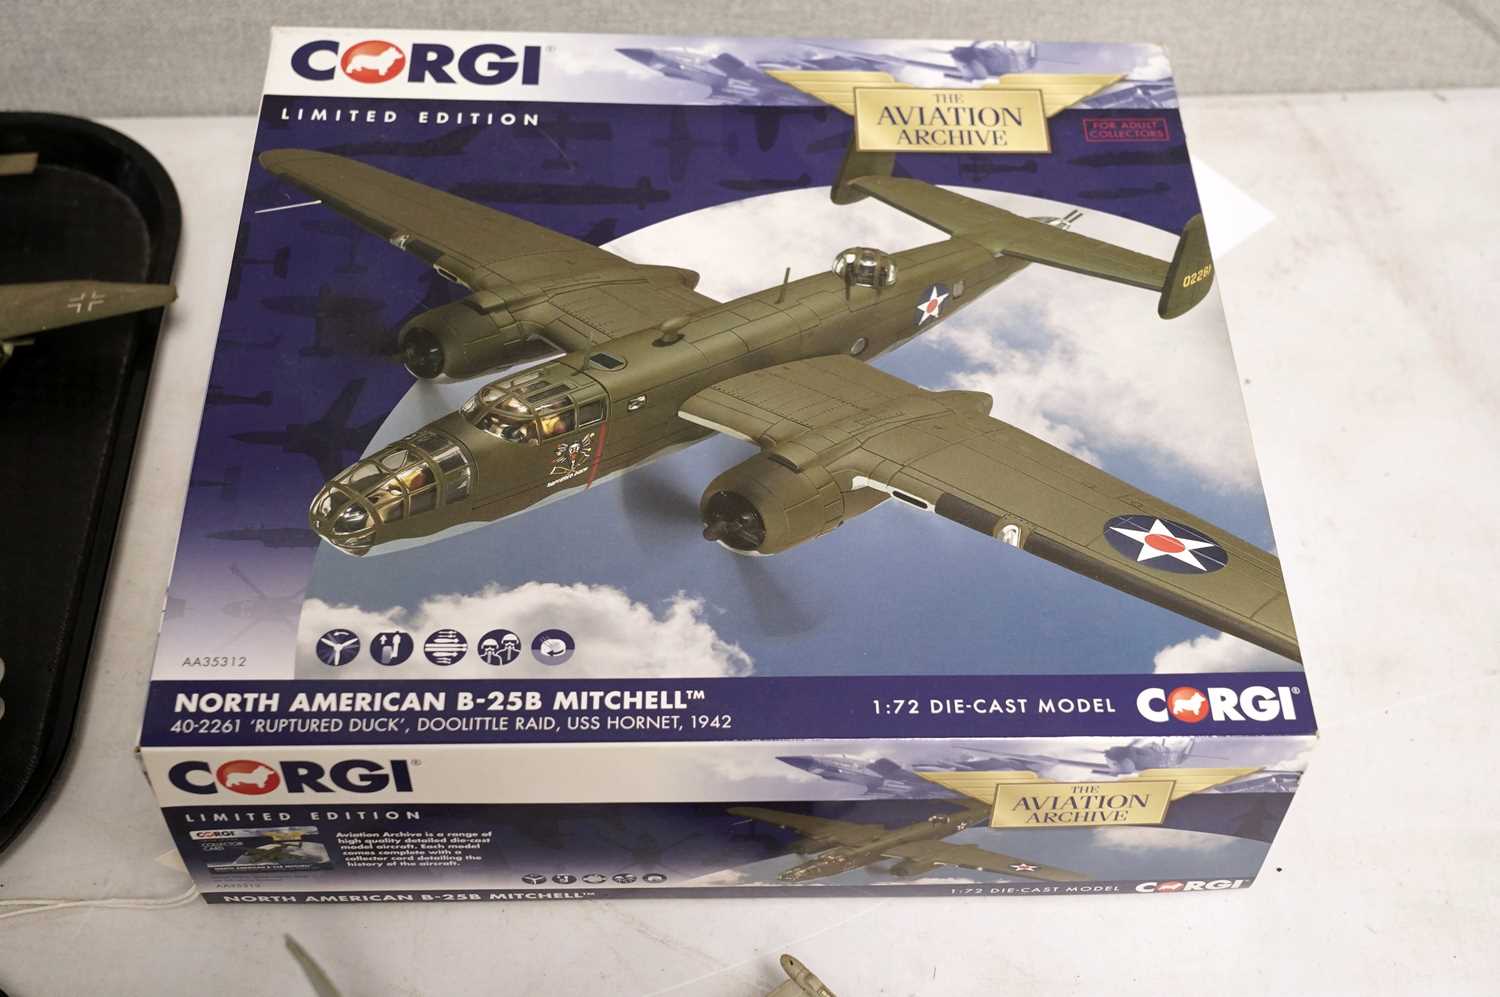 A collection of Corgi The Aviation Archive WWII model military aircraft - Image 5 of 7